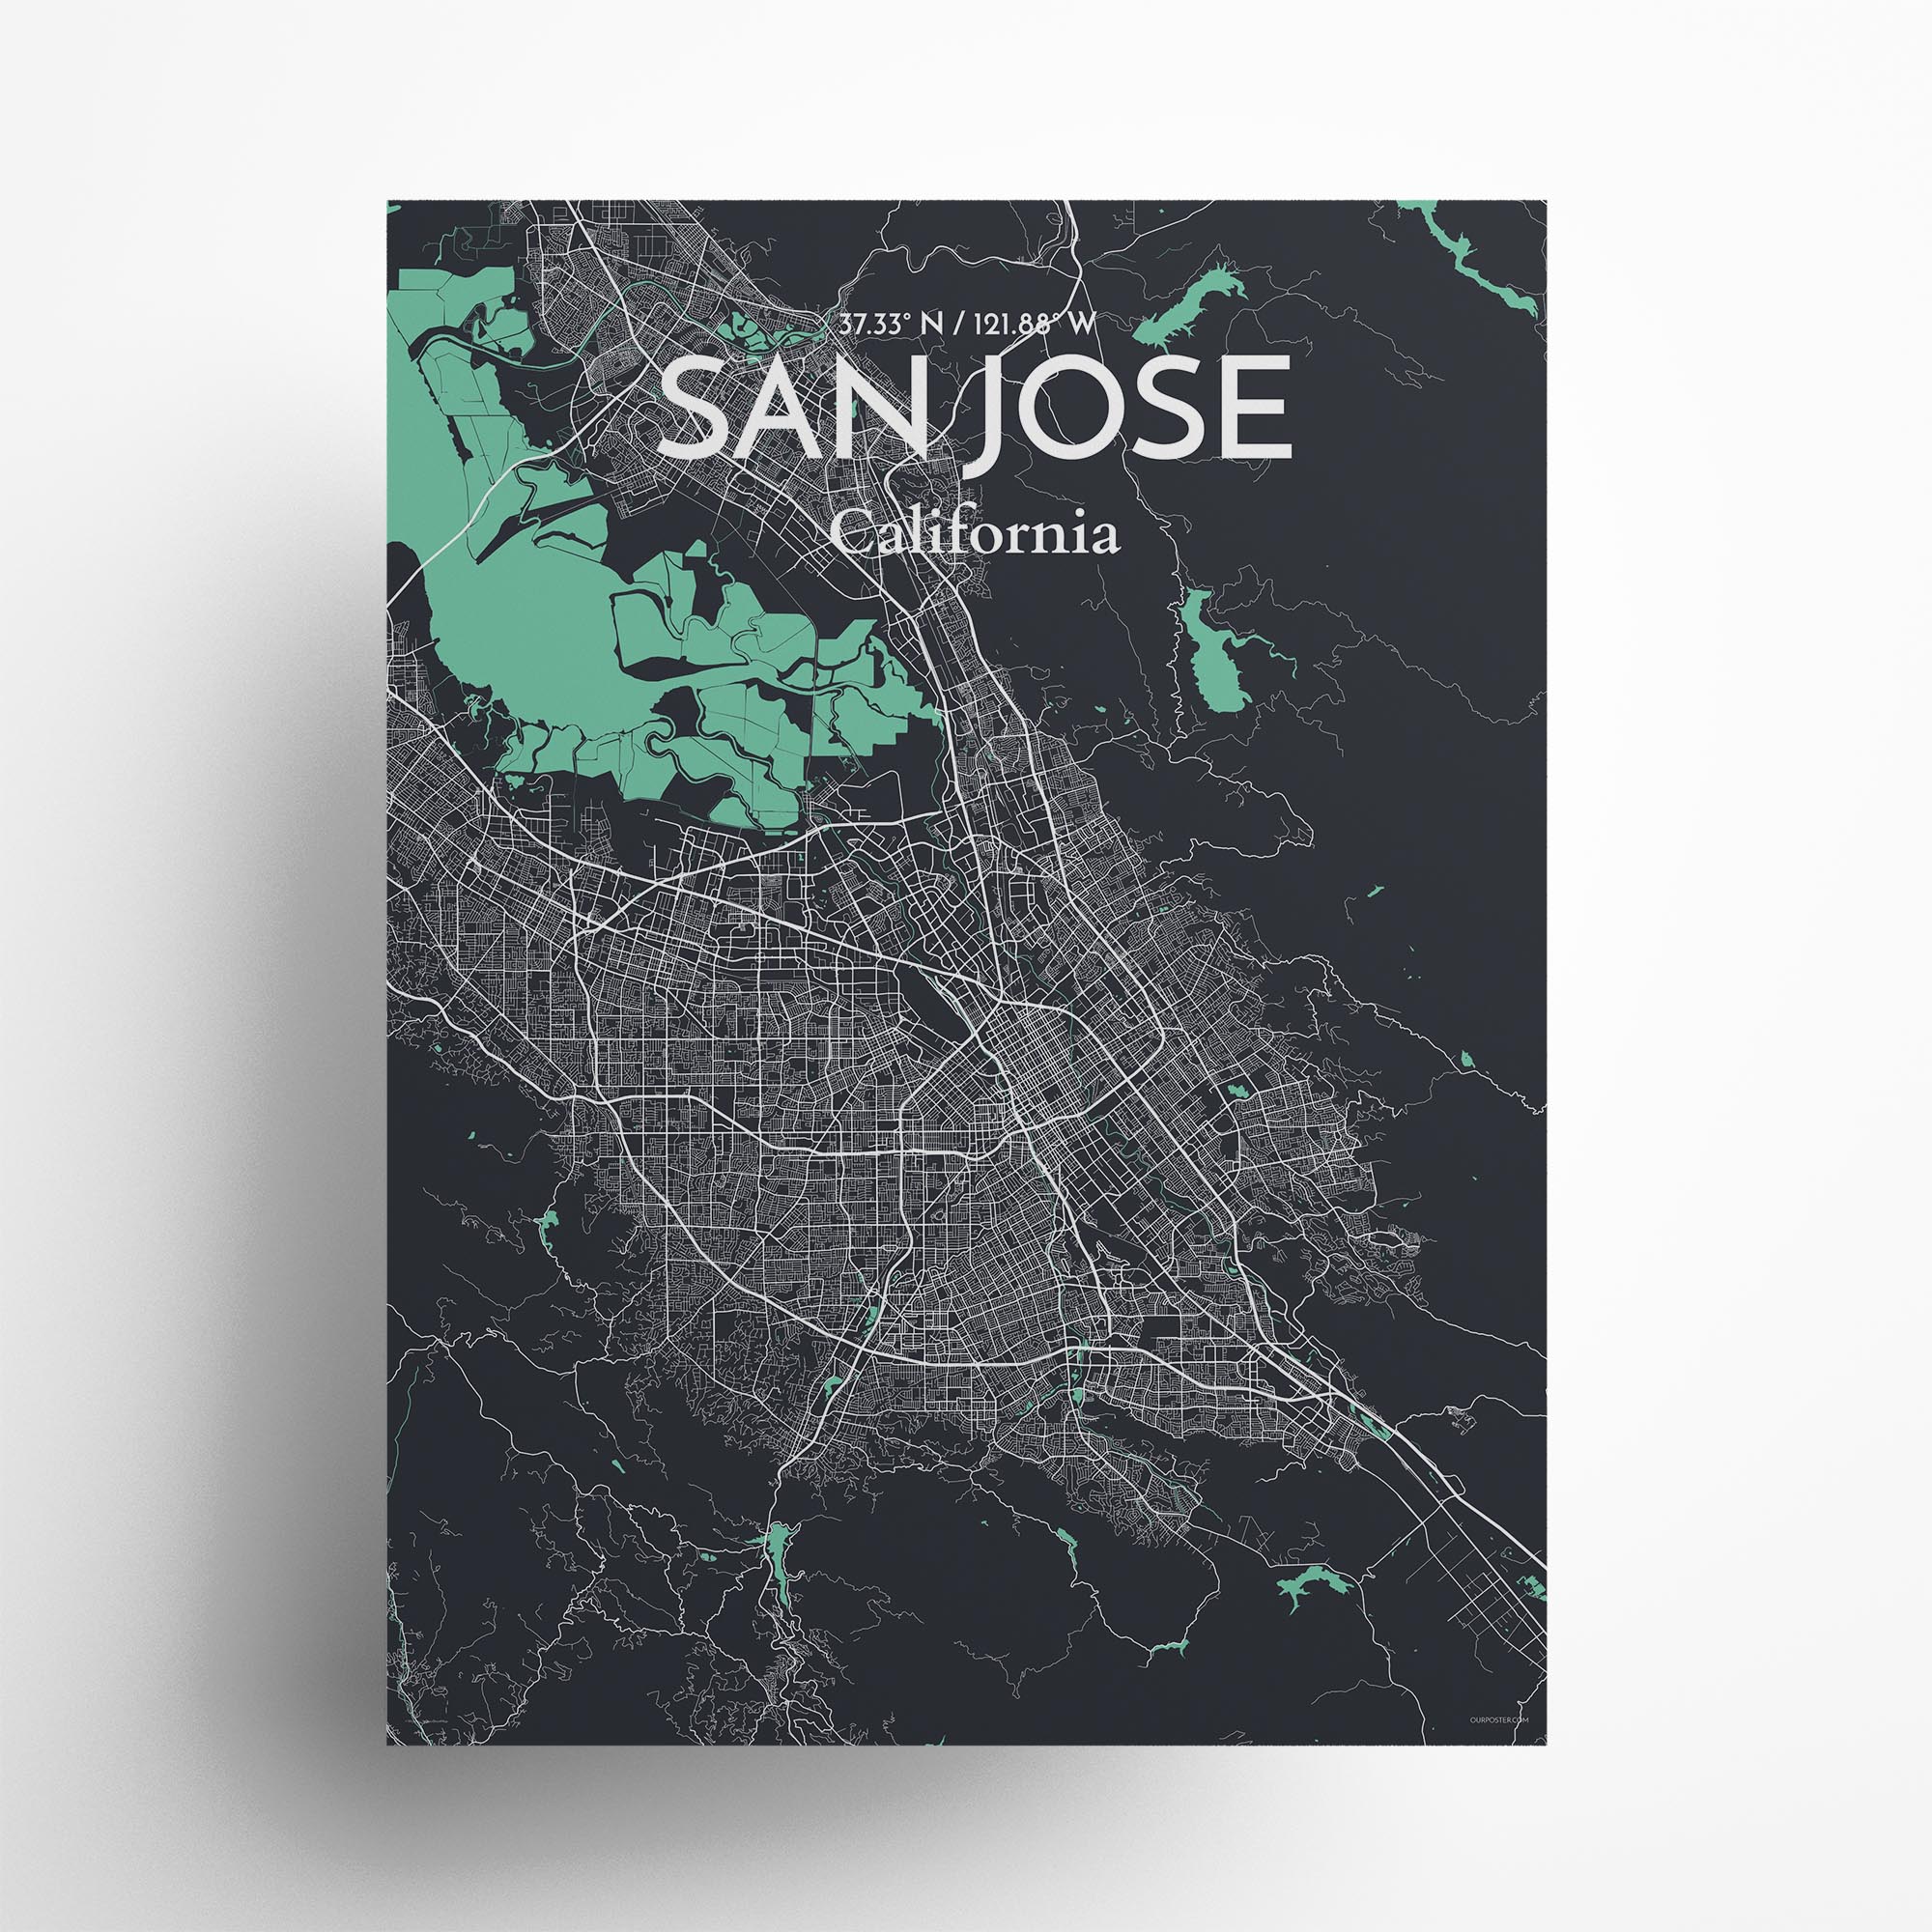 San Jose city map poster in Dream of size 18" x 24"